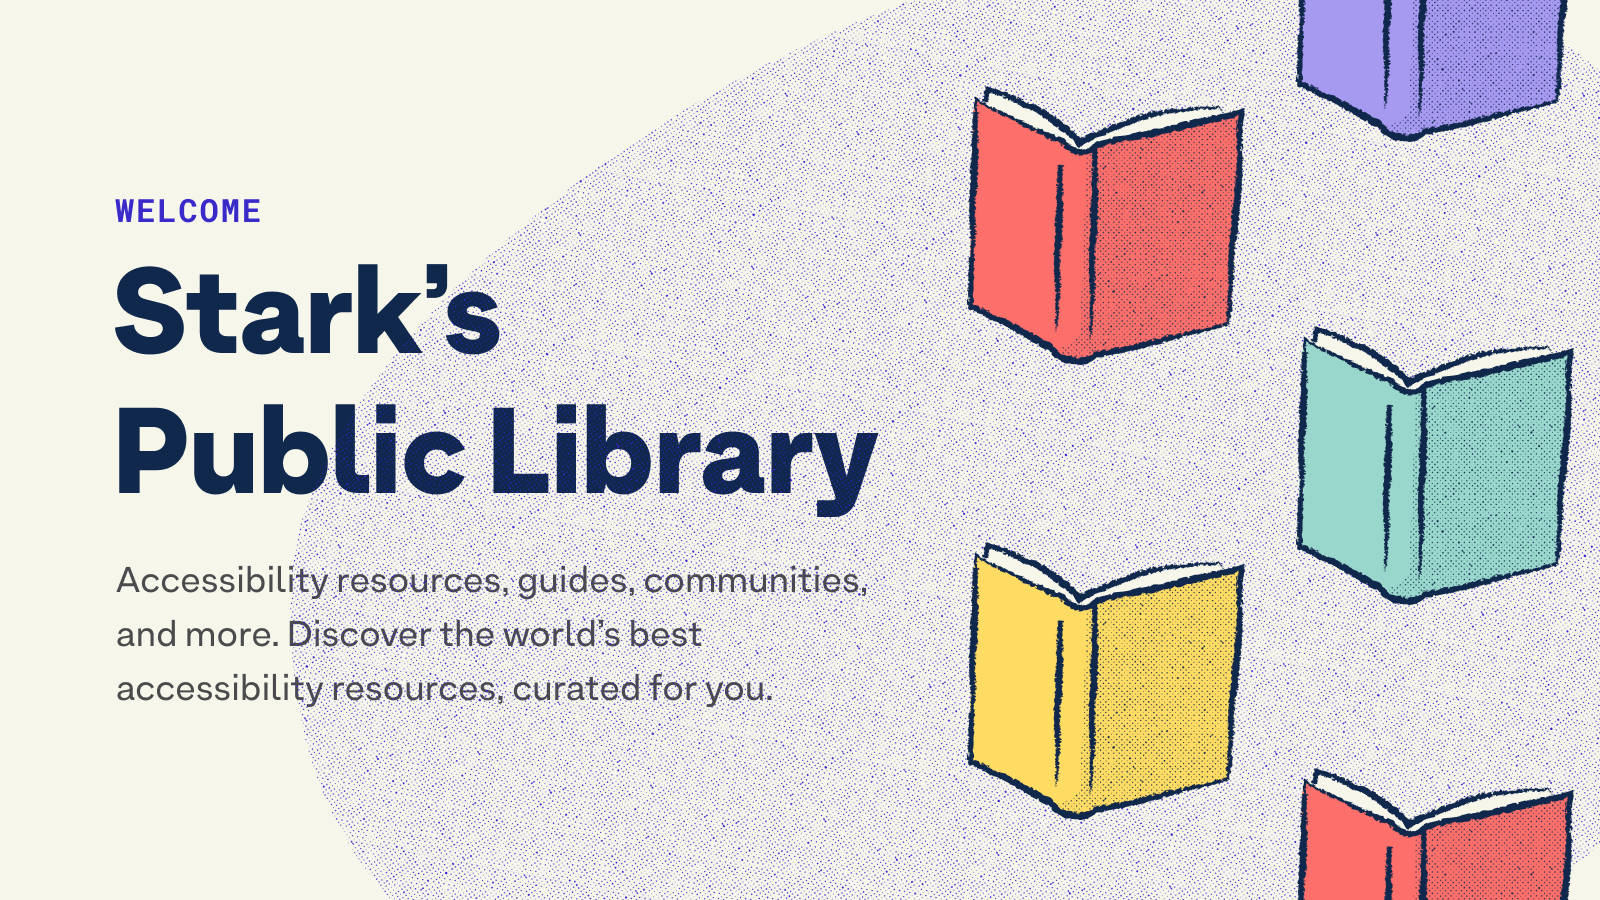 Library: Accessibility resources, guides, communities, and more